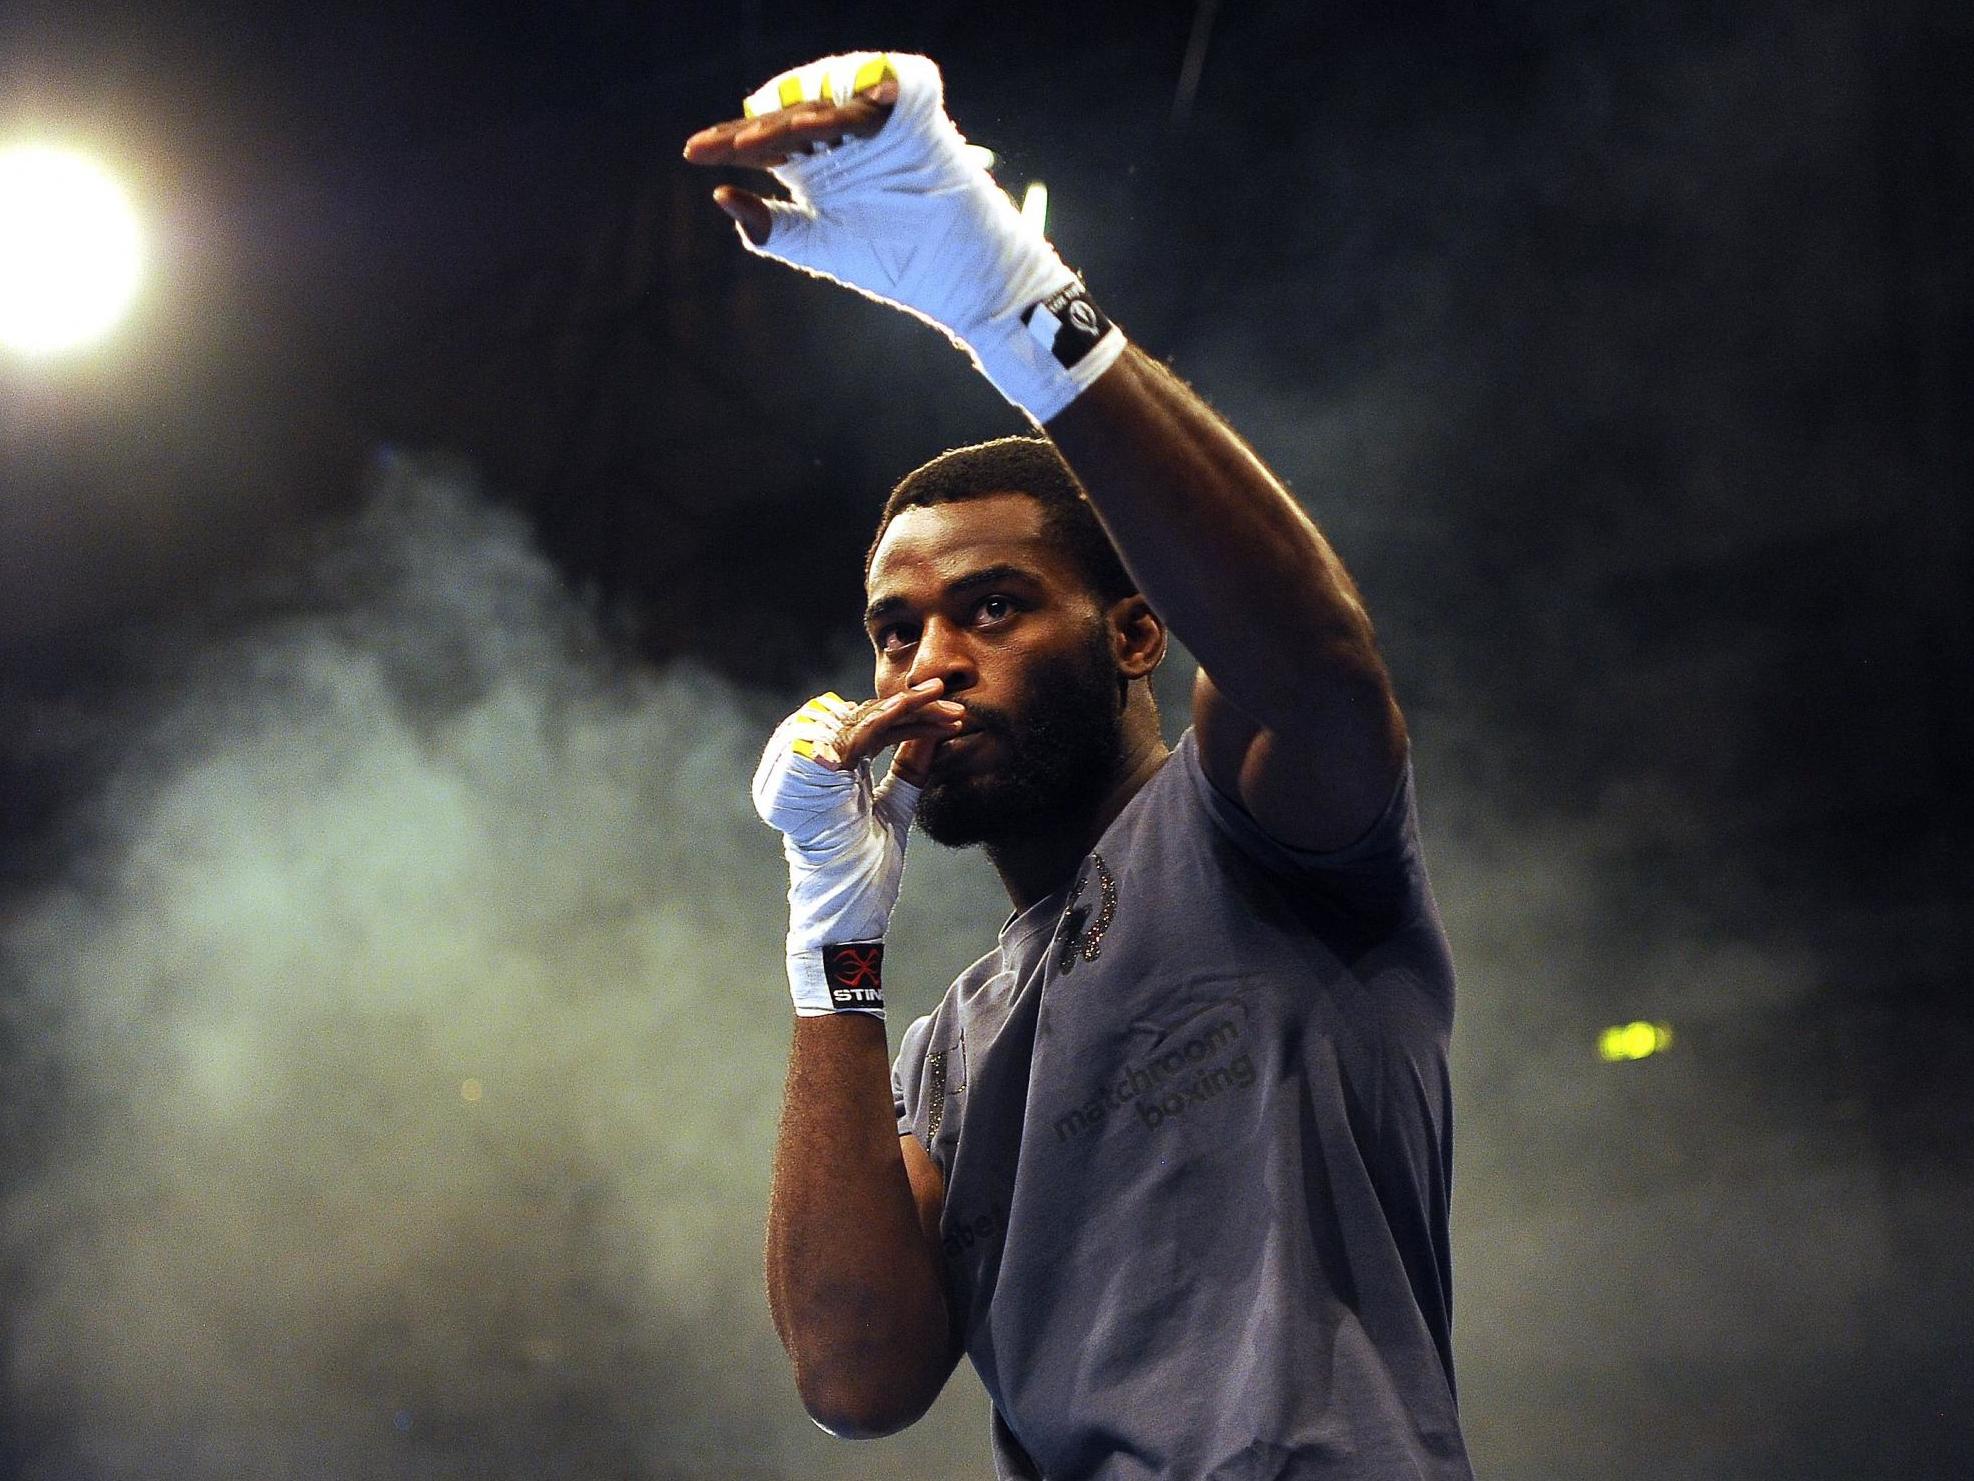 Joshua Buatsi senses a chance to become a star in boxing